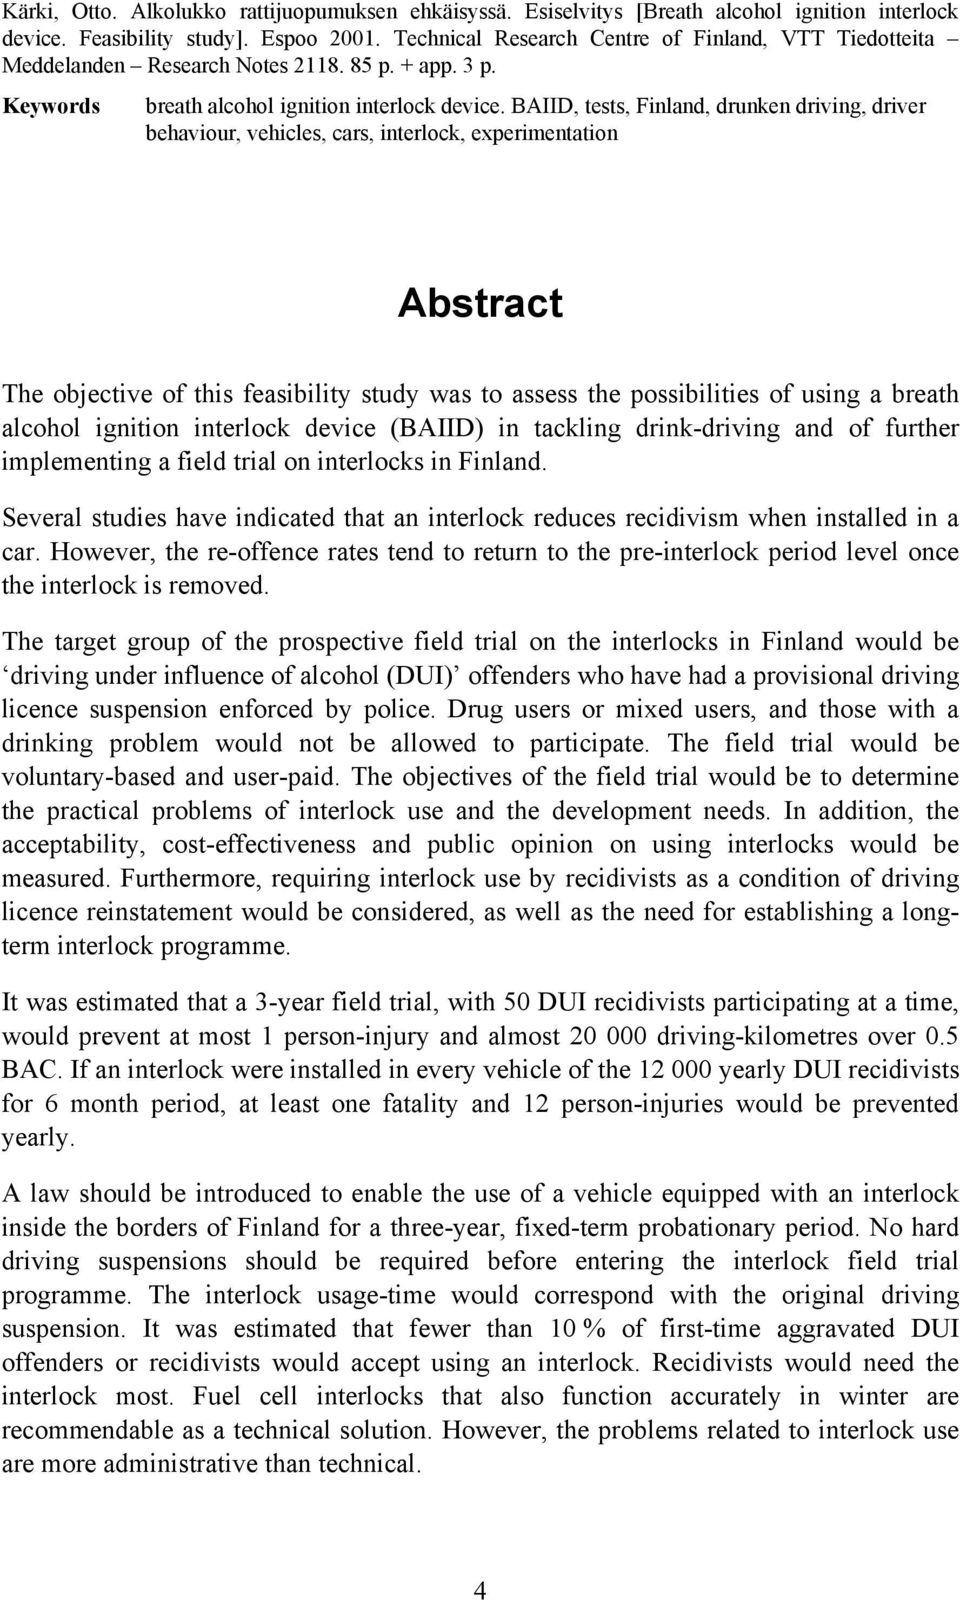 BAIID, tests, Finland, drunken driving, driver behaviour, vehicles, cars, interlock, experimentation Abstract The objective of this feasibility study was to assess the possibilities of using a breath